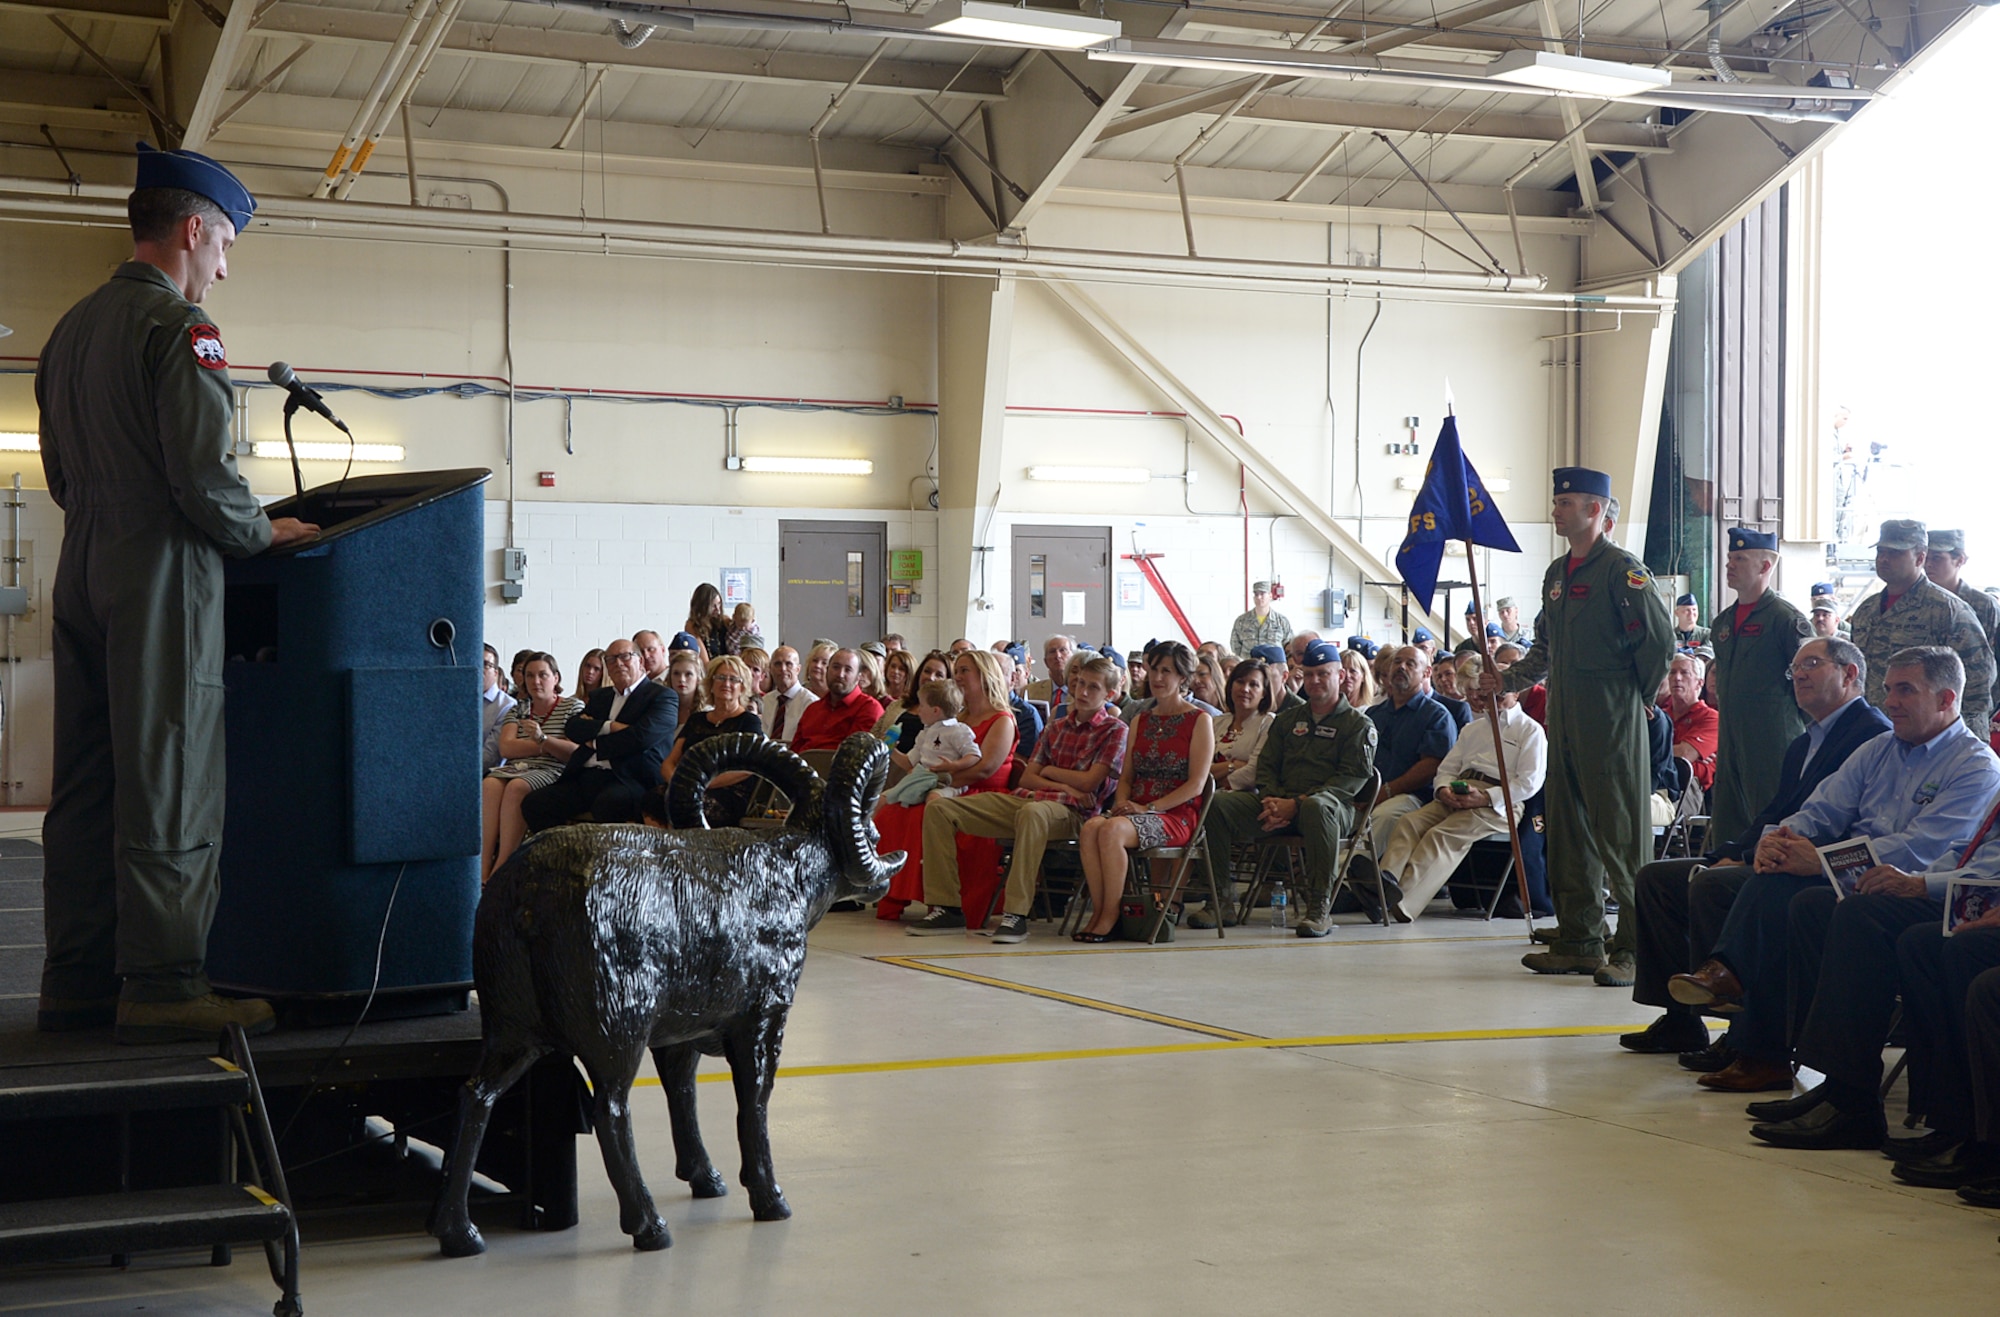 Lt. Col. George R. Watkins addresses the audience and squadron members during the 34th Fighter Squadron activation ceremony July 17 at Hill Air Force Base, Utah. The 34th will be the first combat squadron to fly the Air Force’s newest fighter aircraft, the F-35A. The squadron has an extremely rich history. After many contributions in major U.S. conflicts, the 34th was relocated to Hill AFB on Dec. 8, 1975, where they became the first fighter squadron to receive the F-16 fighter aircraft. The squadron’s first F-35A will arrive in September.  (U.S. Air Force photo by Alex R. Lloyd/Released)